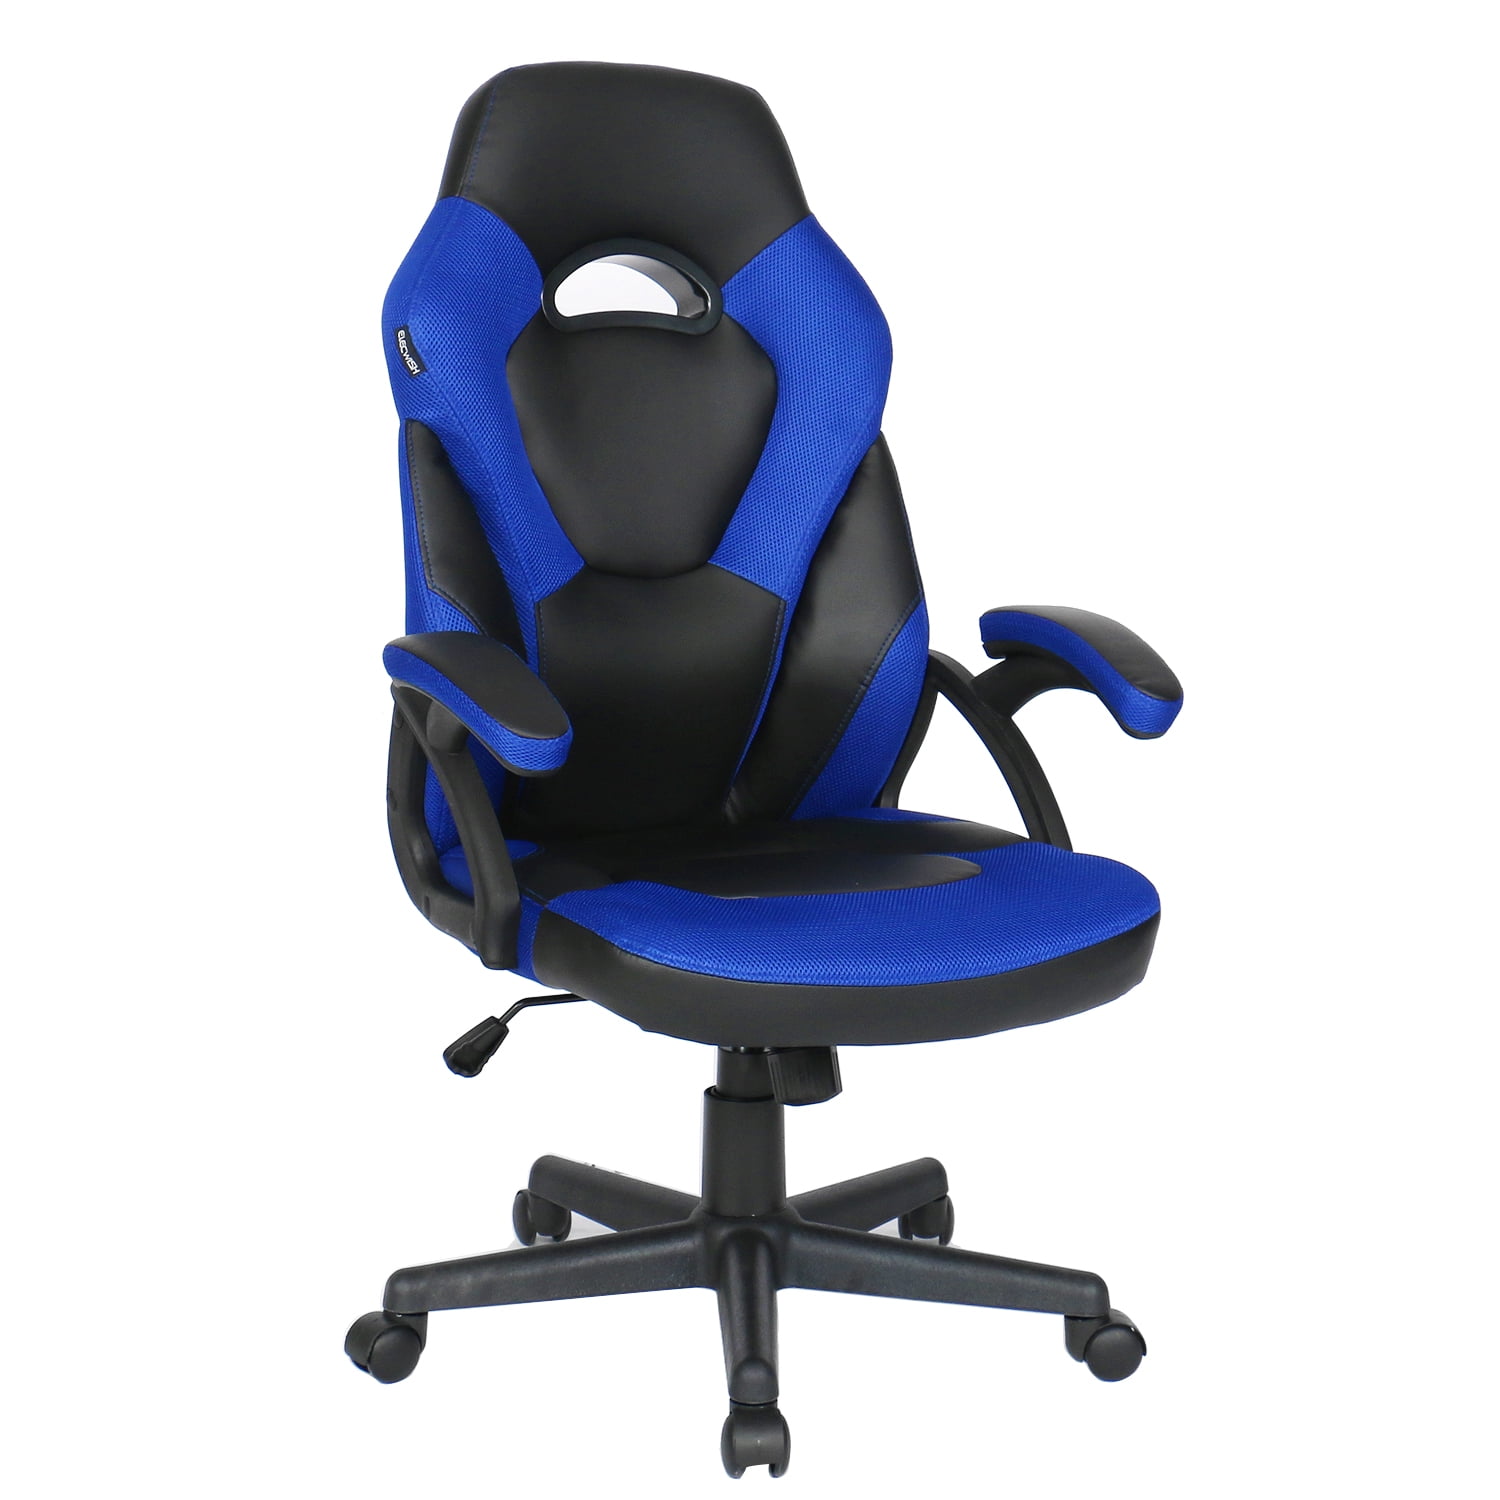 ELECWISH Office Chair Leather Computer Gaming Chair High Back Ergonomic ...